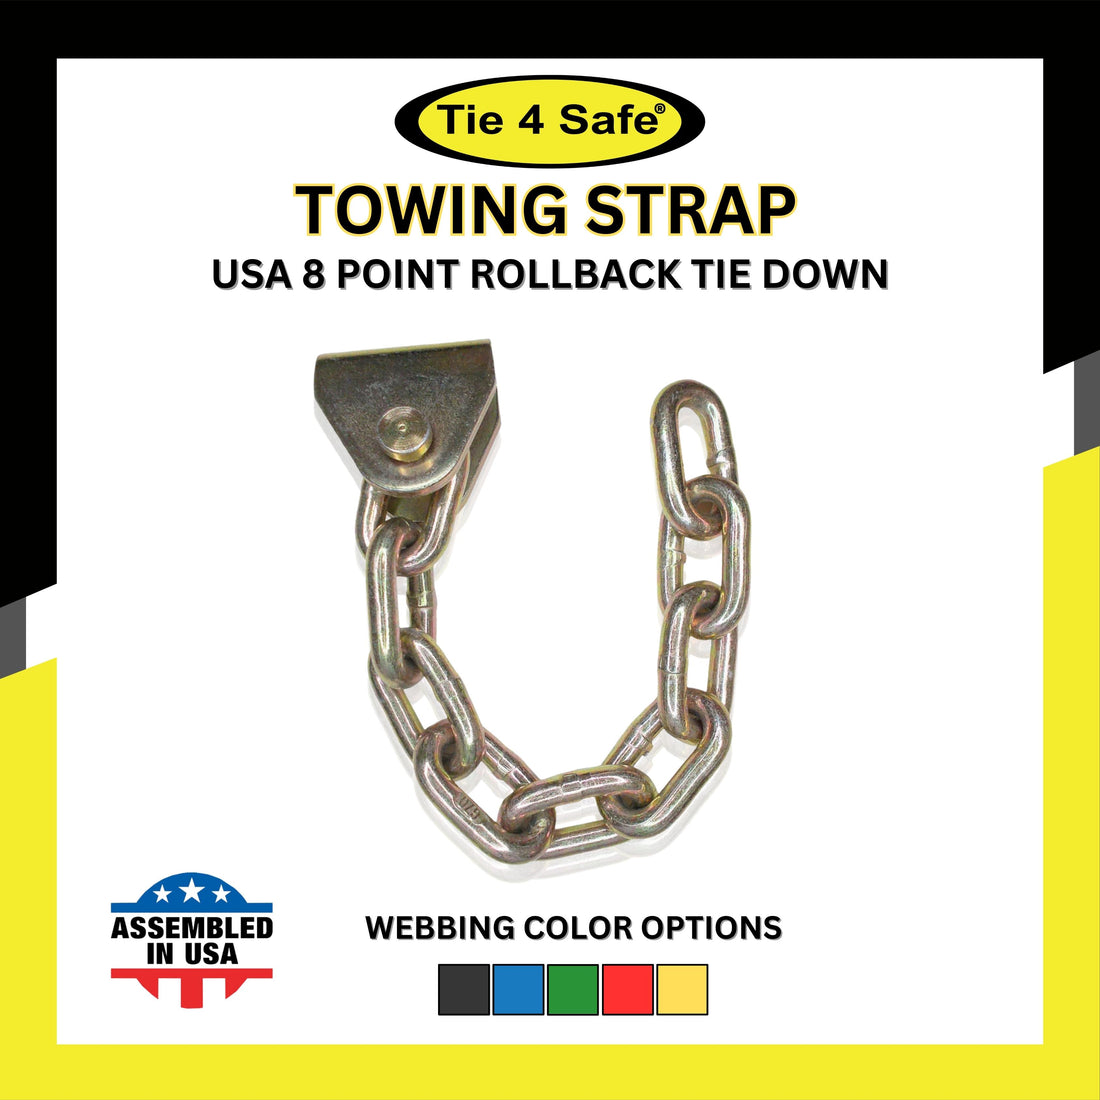 USA 8 Point Rollback Tie Down System With Chain End